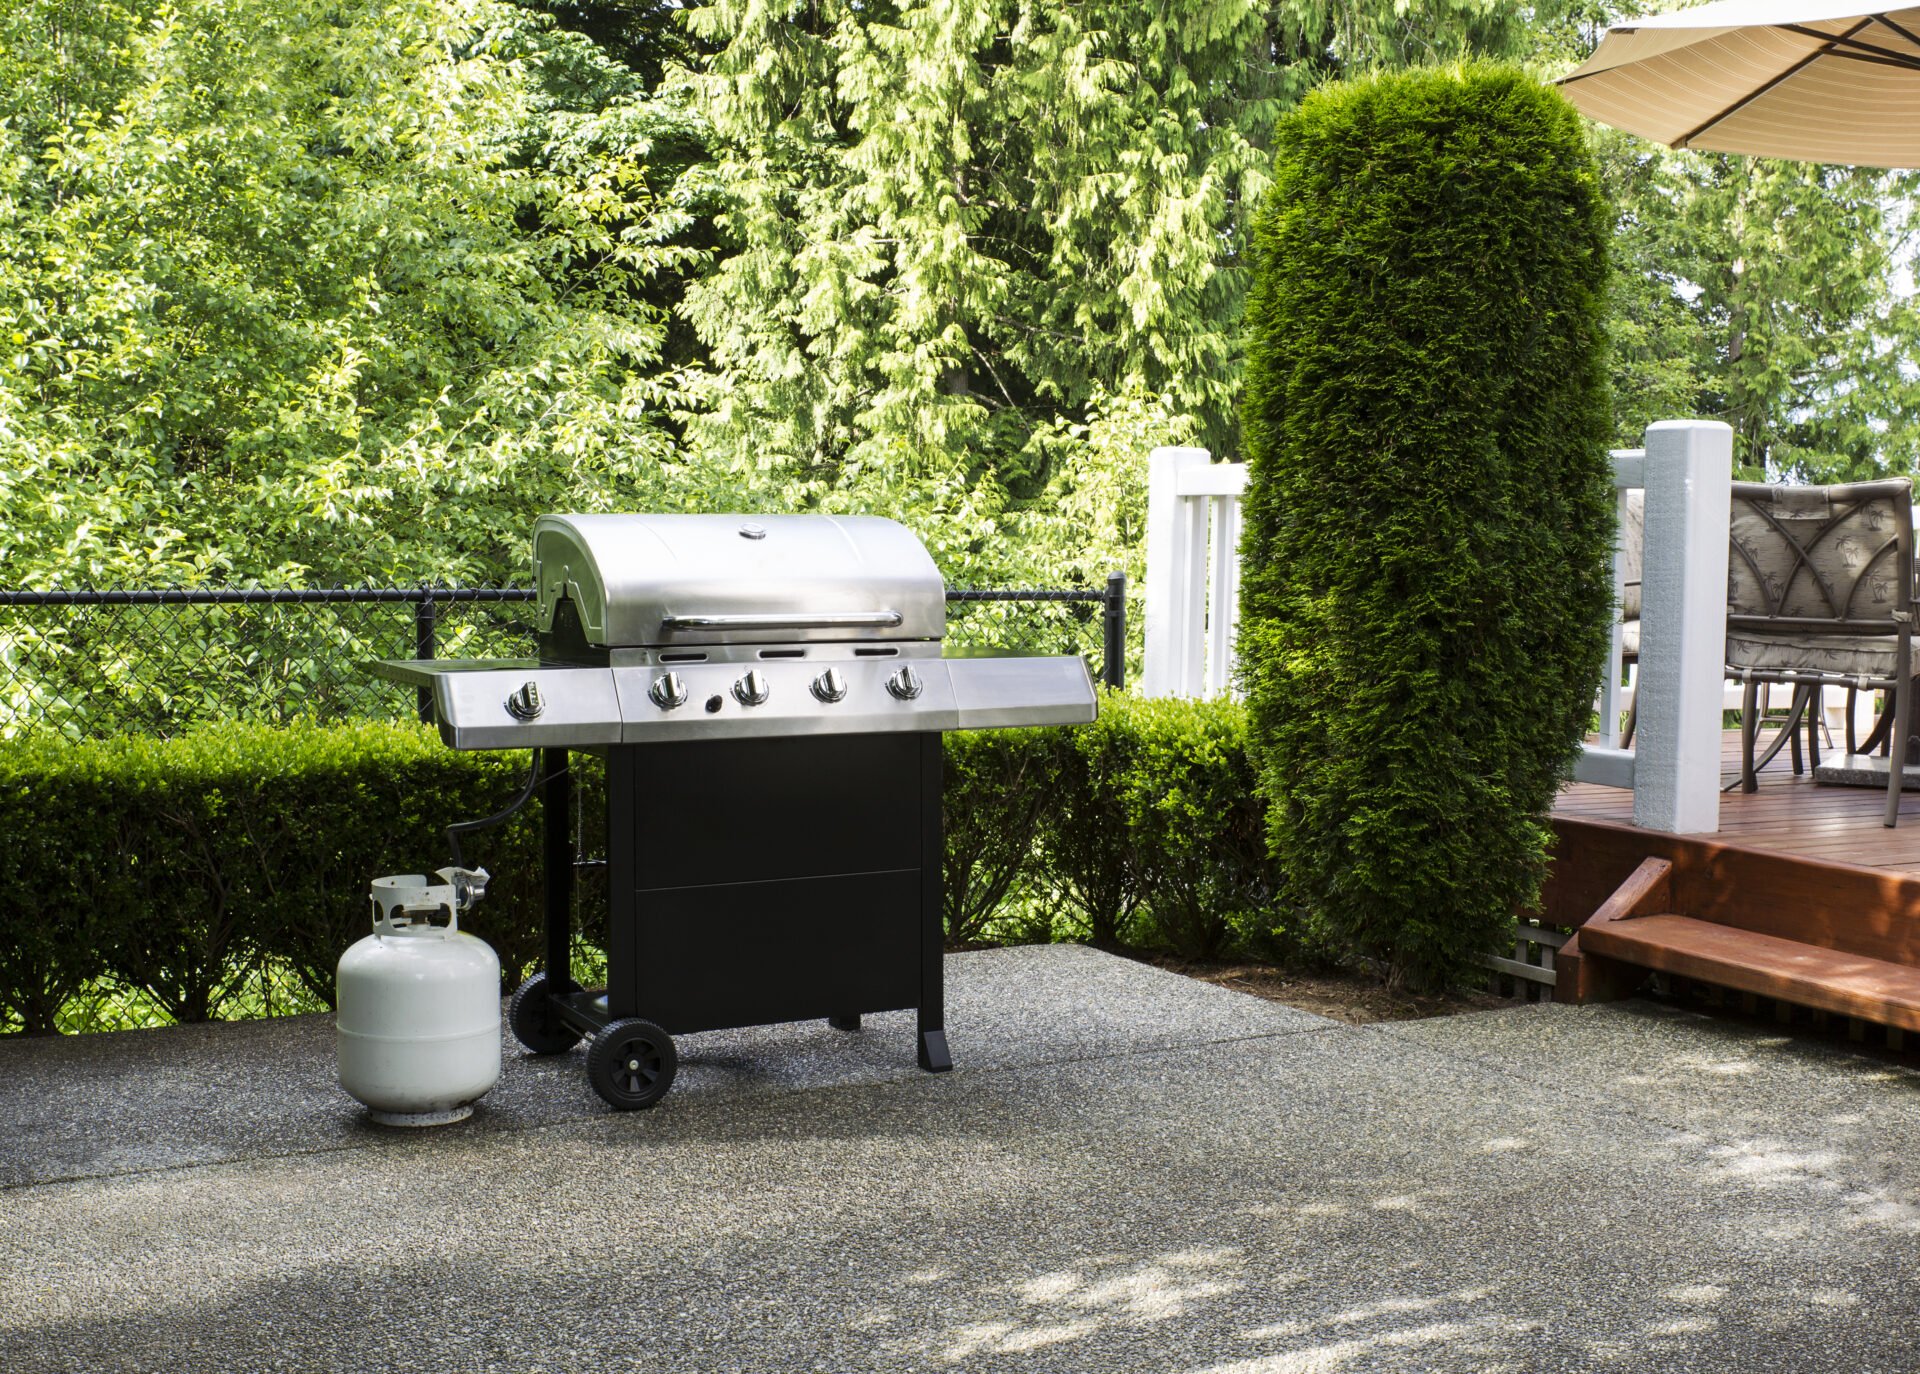 Horizontal photo of a large barbeque cooker on concrete outdoor patio with woods and deck in background